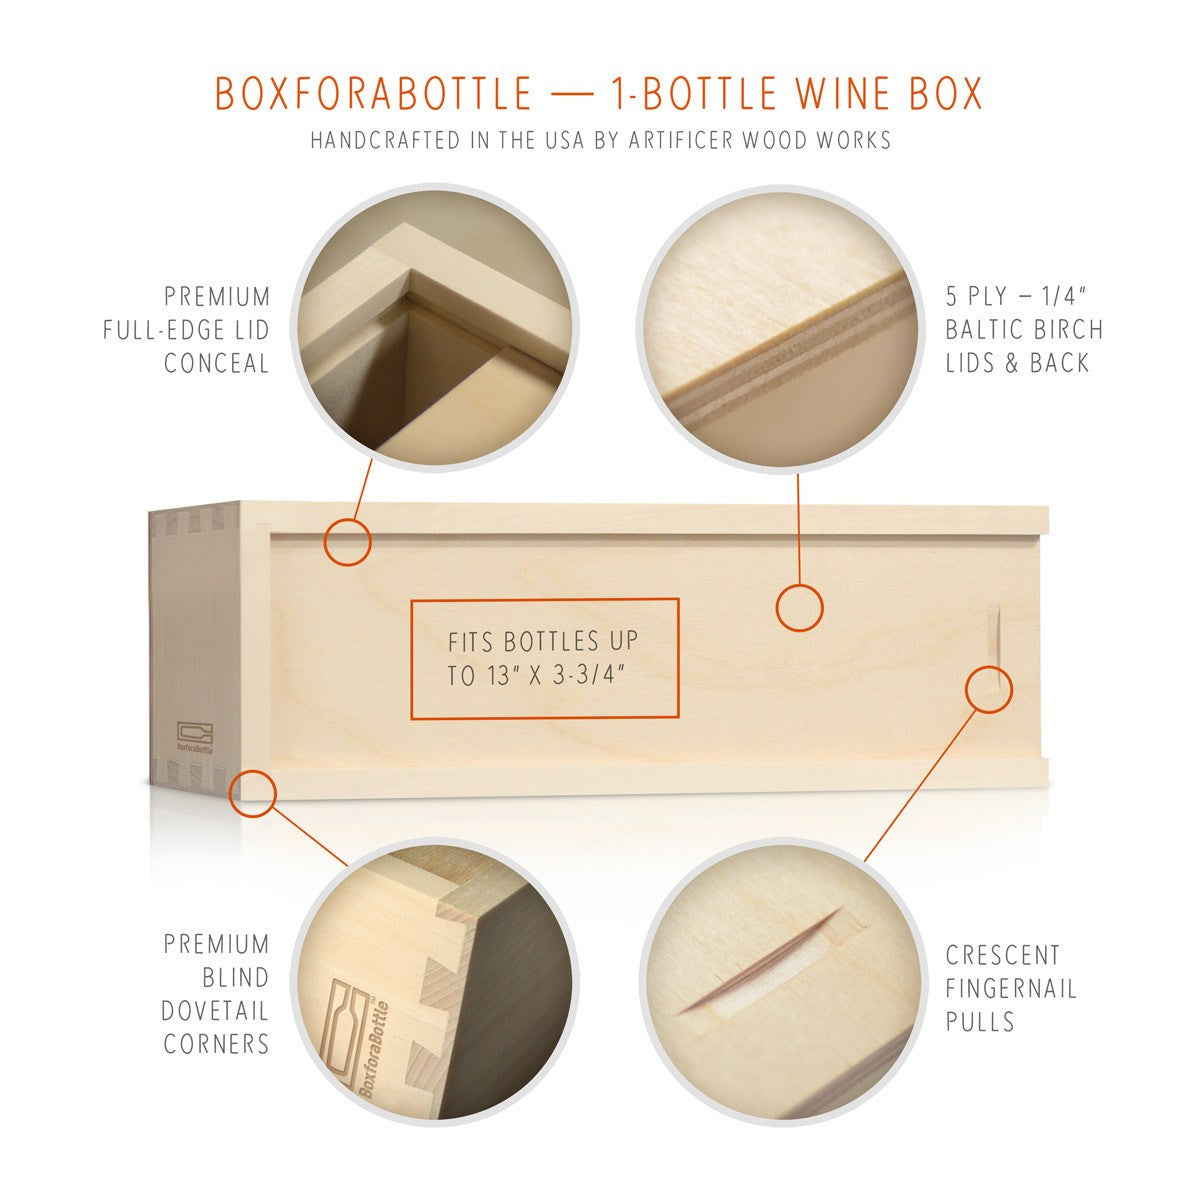 Wise Daughter - Wine Box for Dad